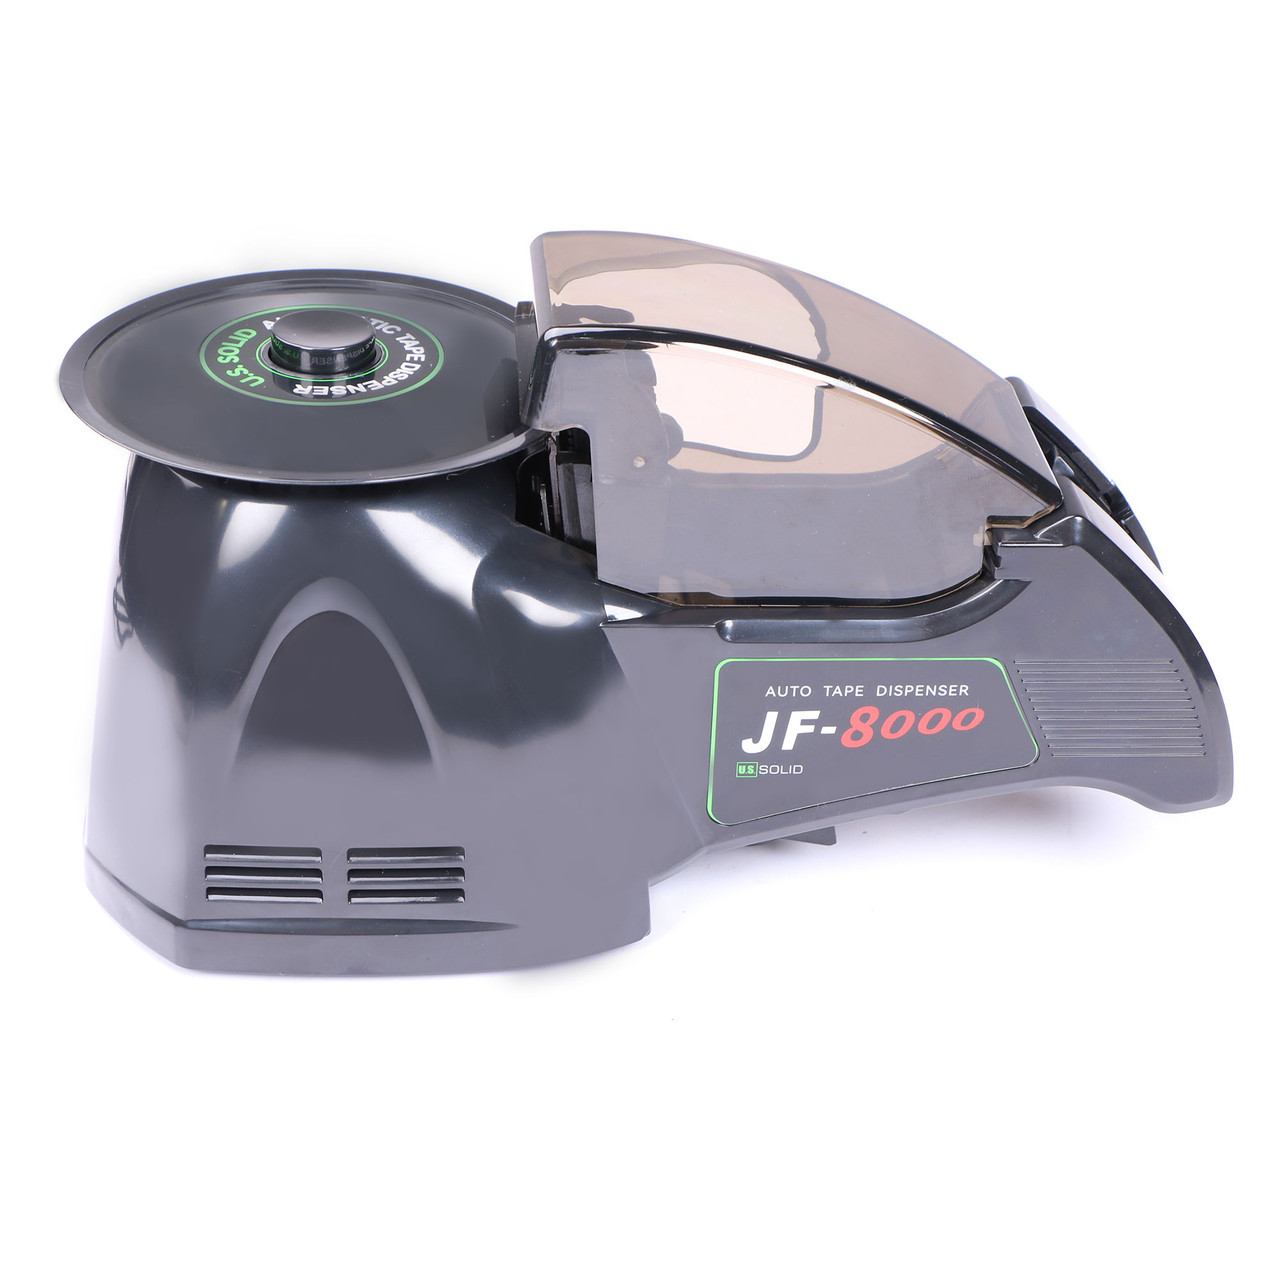 U.S. Solid Automatic Tape Dispenser JF-8000, Tape Width 3-25 mm, Length 5-60 mm